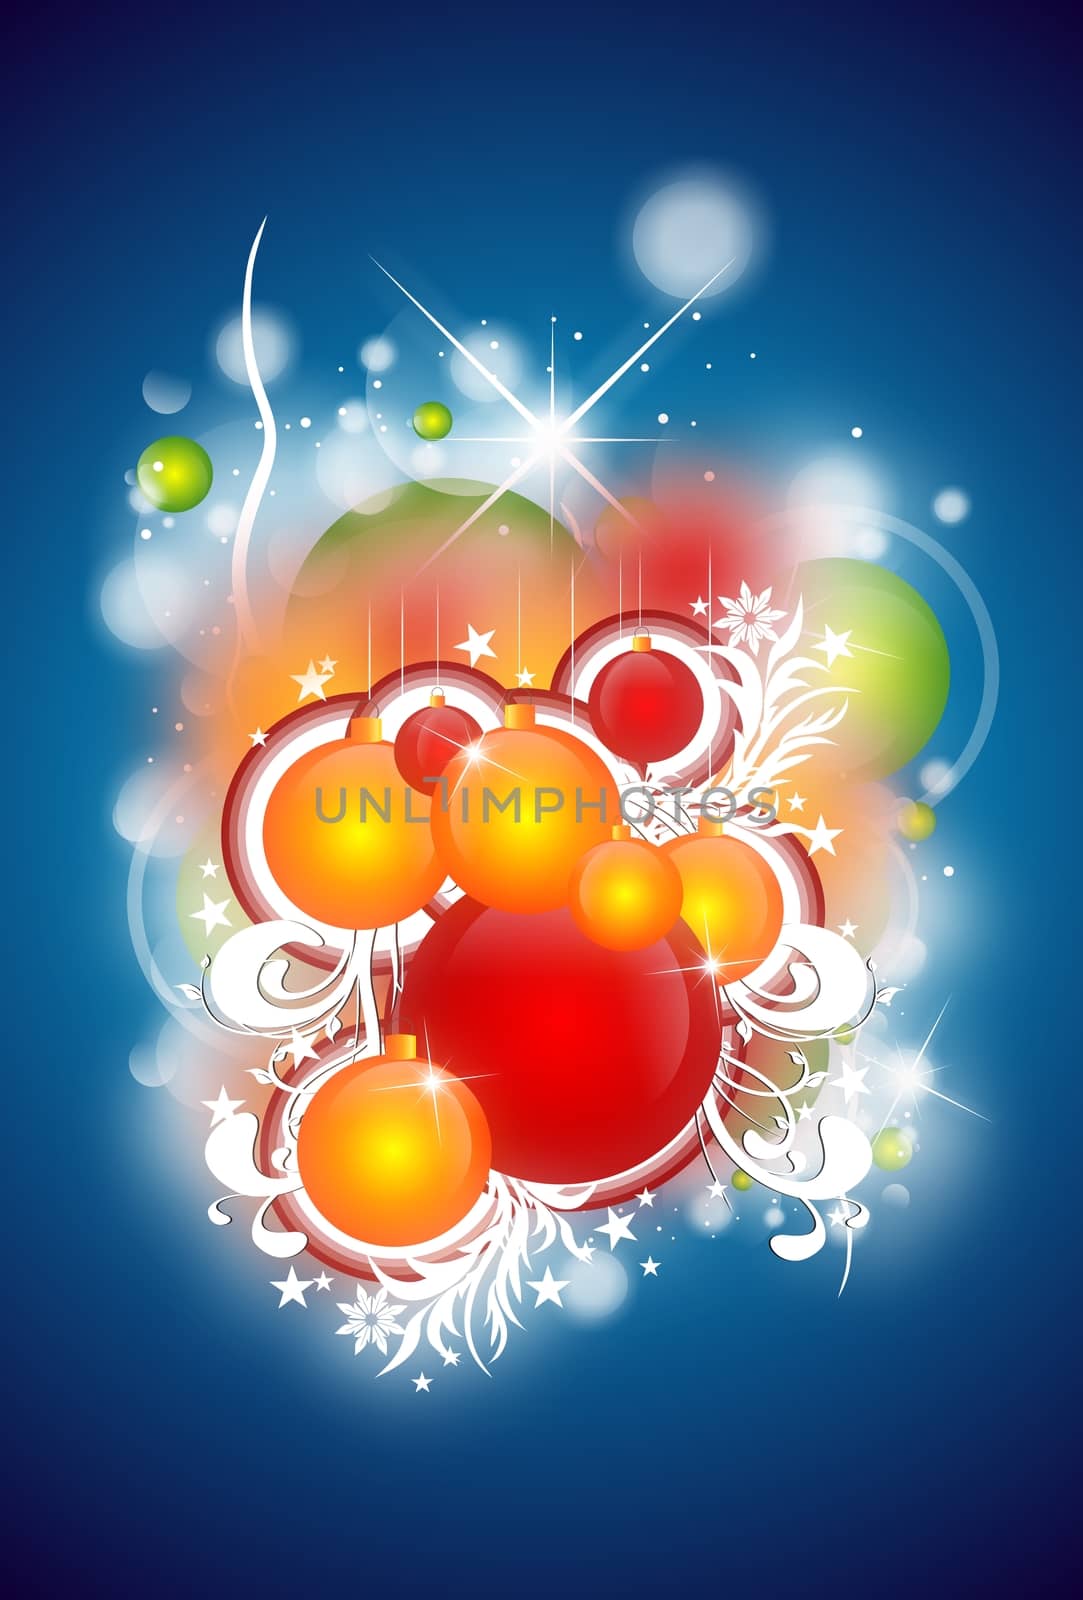 Christmas Abstract Illustration with Christmas Ornaments. Blue Background and Glowing Particles.